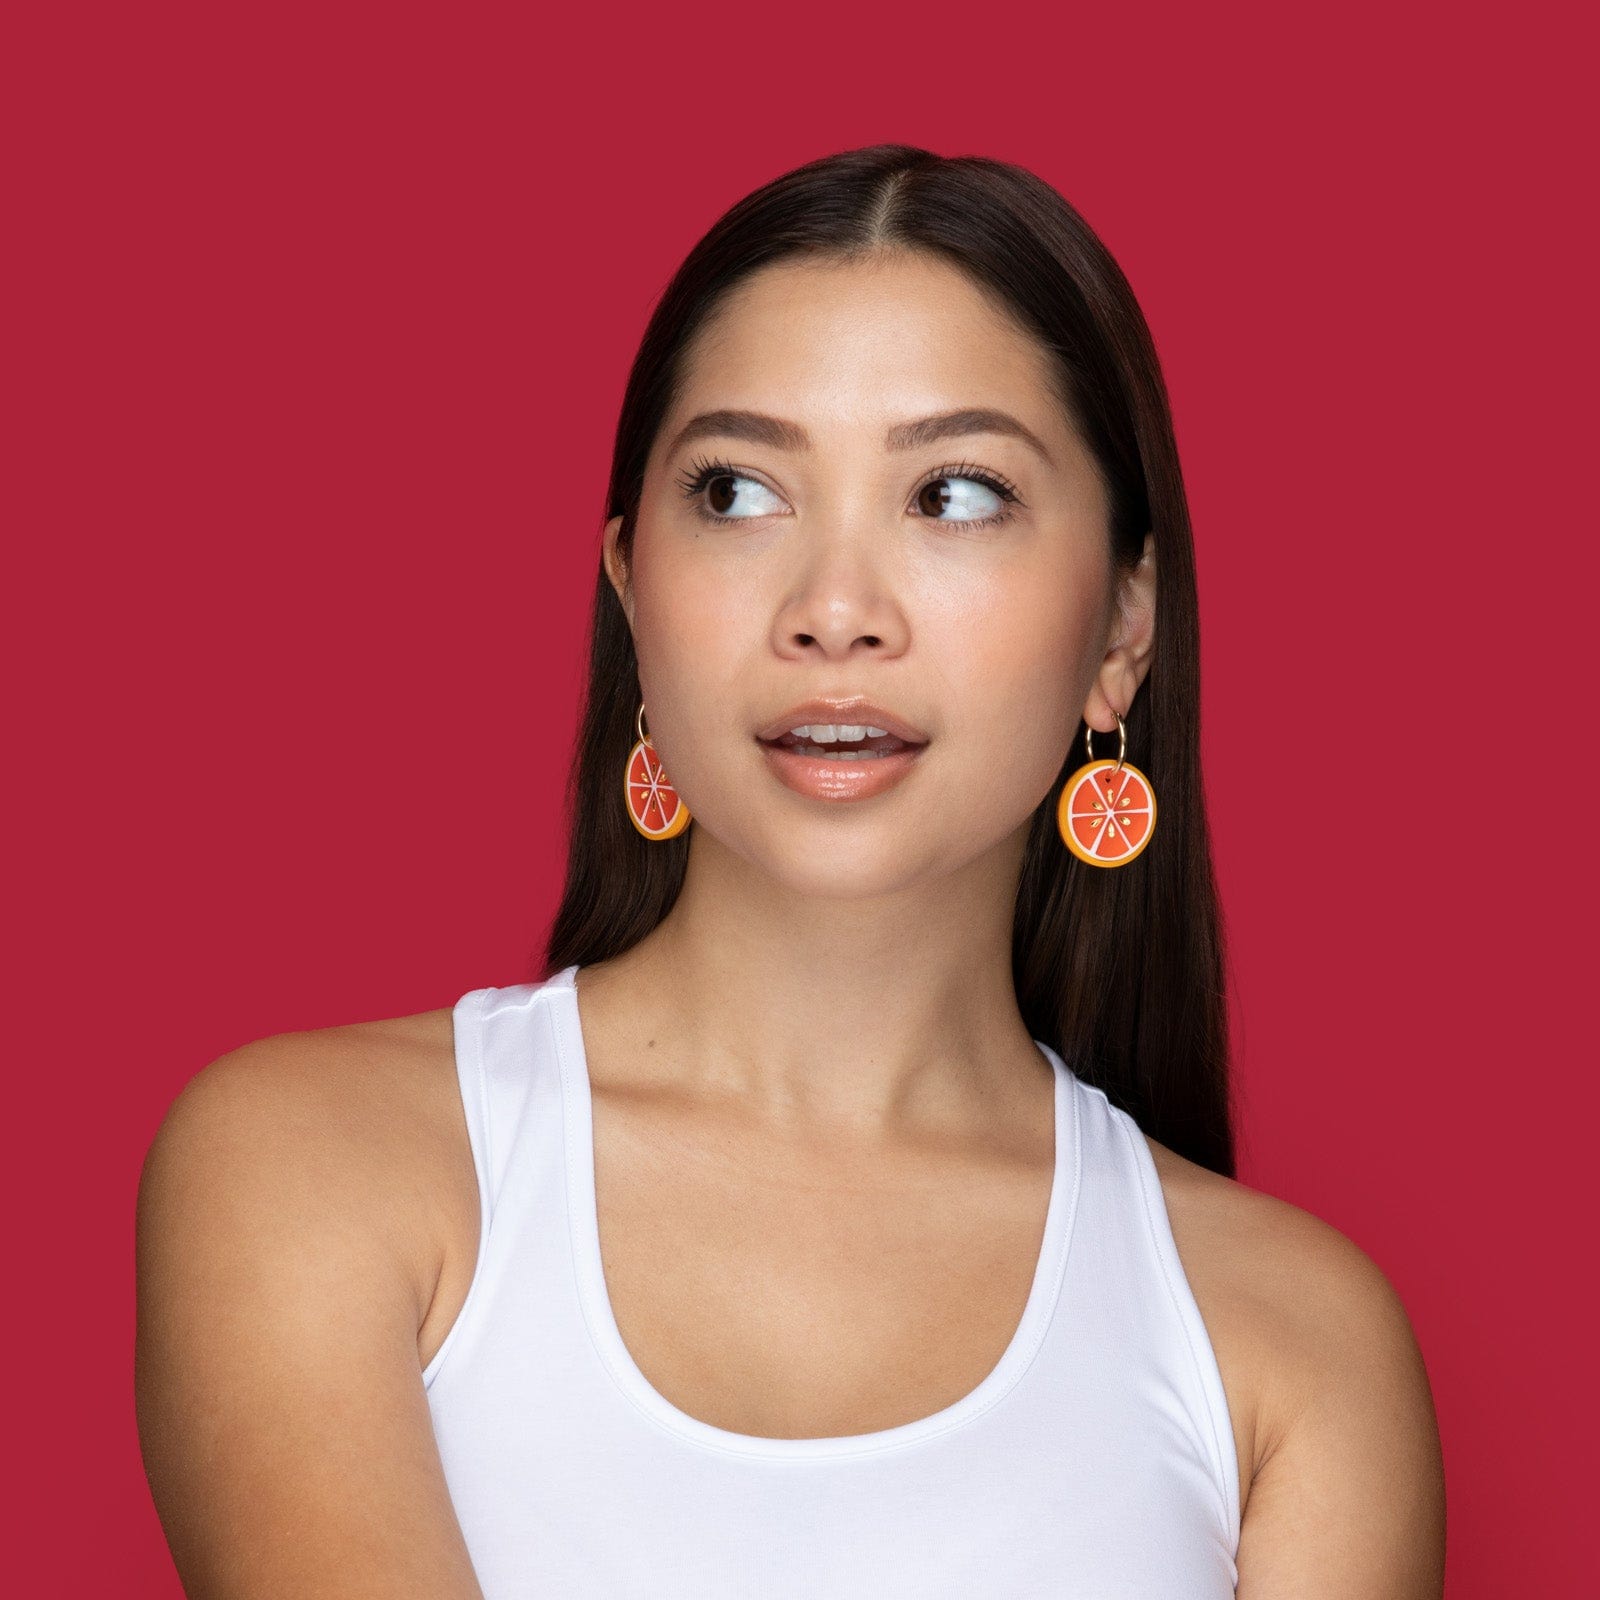 Blood Orange dangly earrings with gold-filled hoops